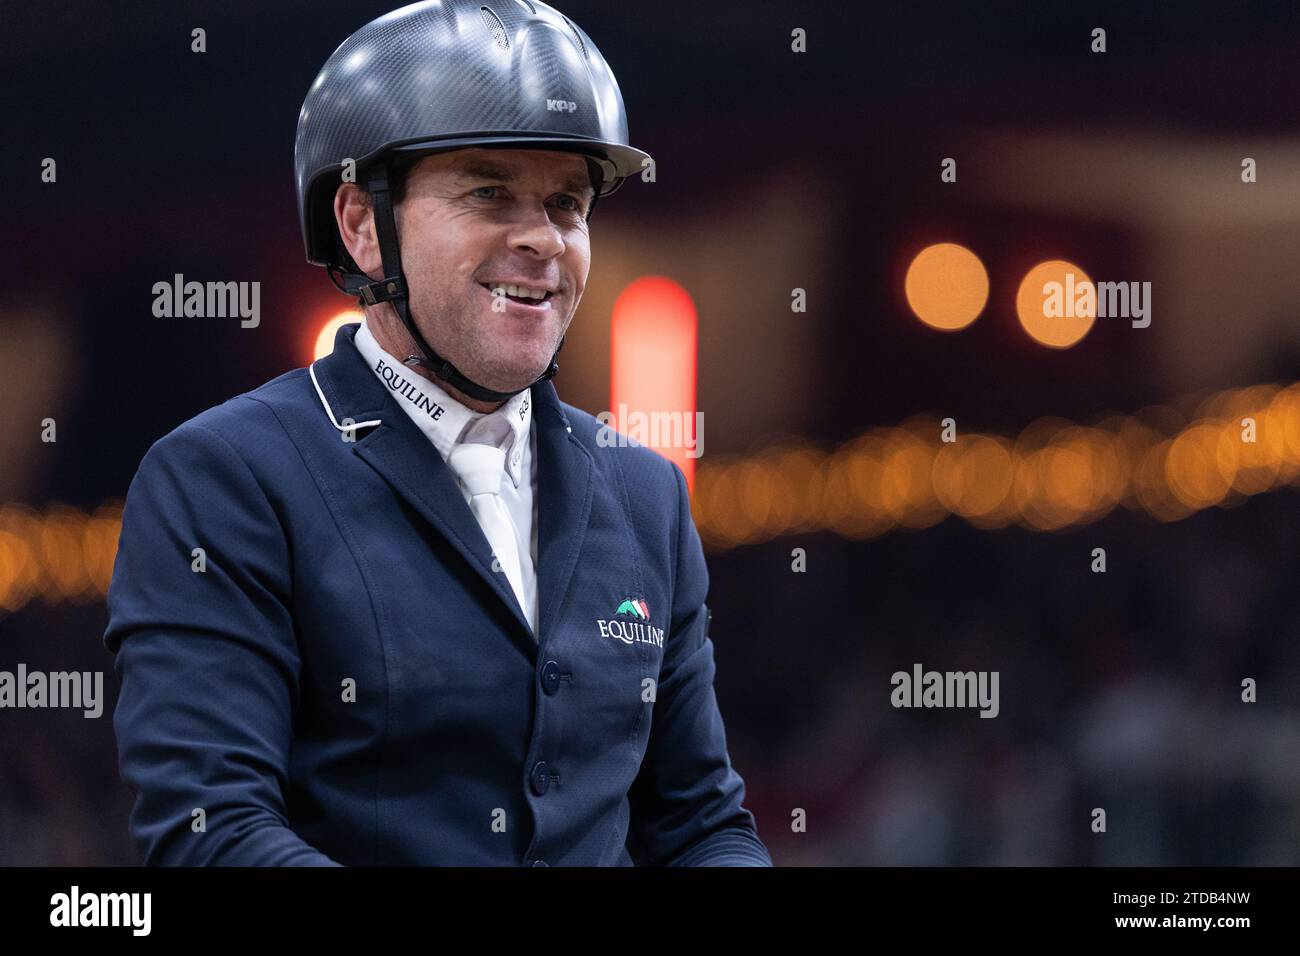 London, UK. December 17, 2023. Conor Swail of Ireland with Casturano competing during the Longines FEI Jumping World Cup at the London International Horse Show on December 17, 2023, London Excel Centre, United Kingdom (Photo by Maxime David - MXIMD Pictures) Credit: MXIMD Pictures/Alamy Live News Stock Photo